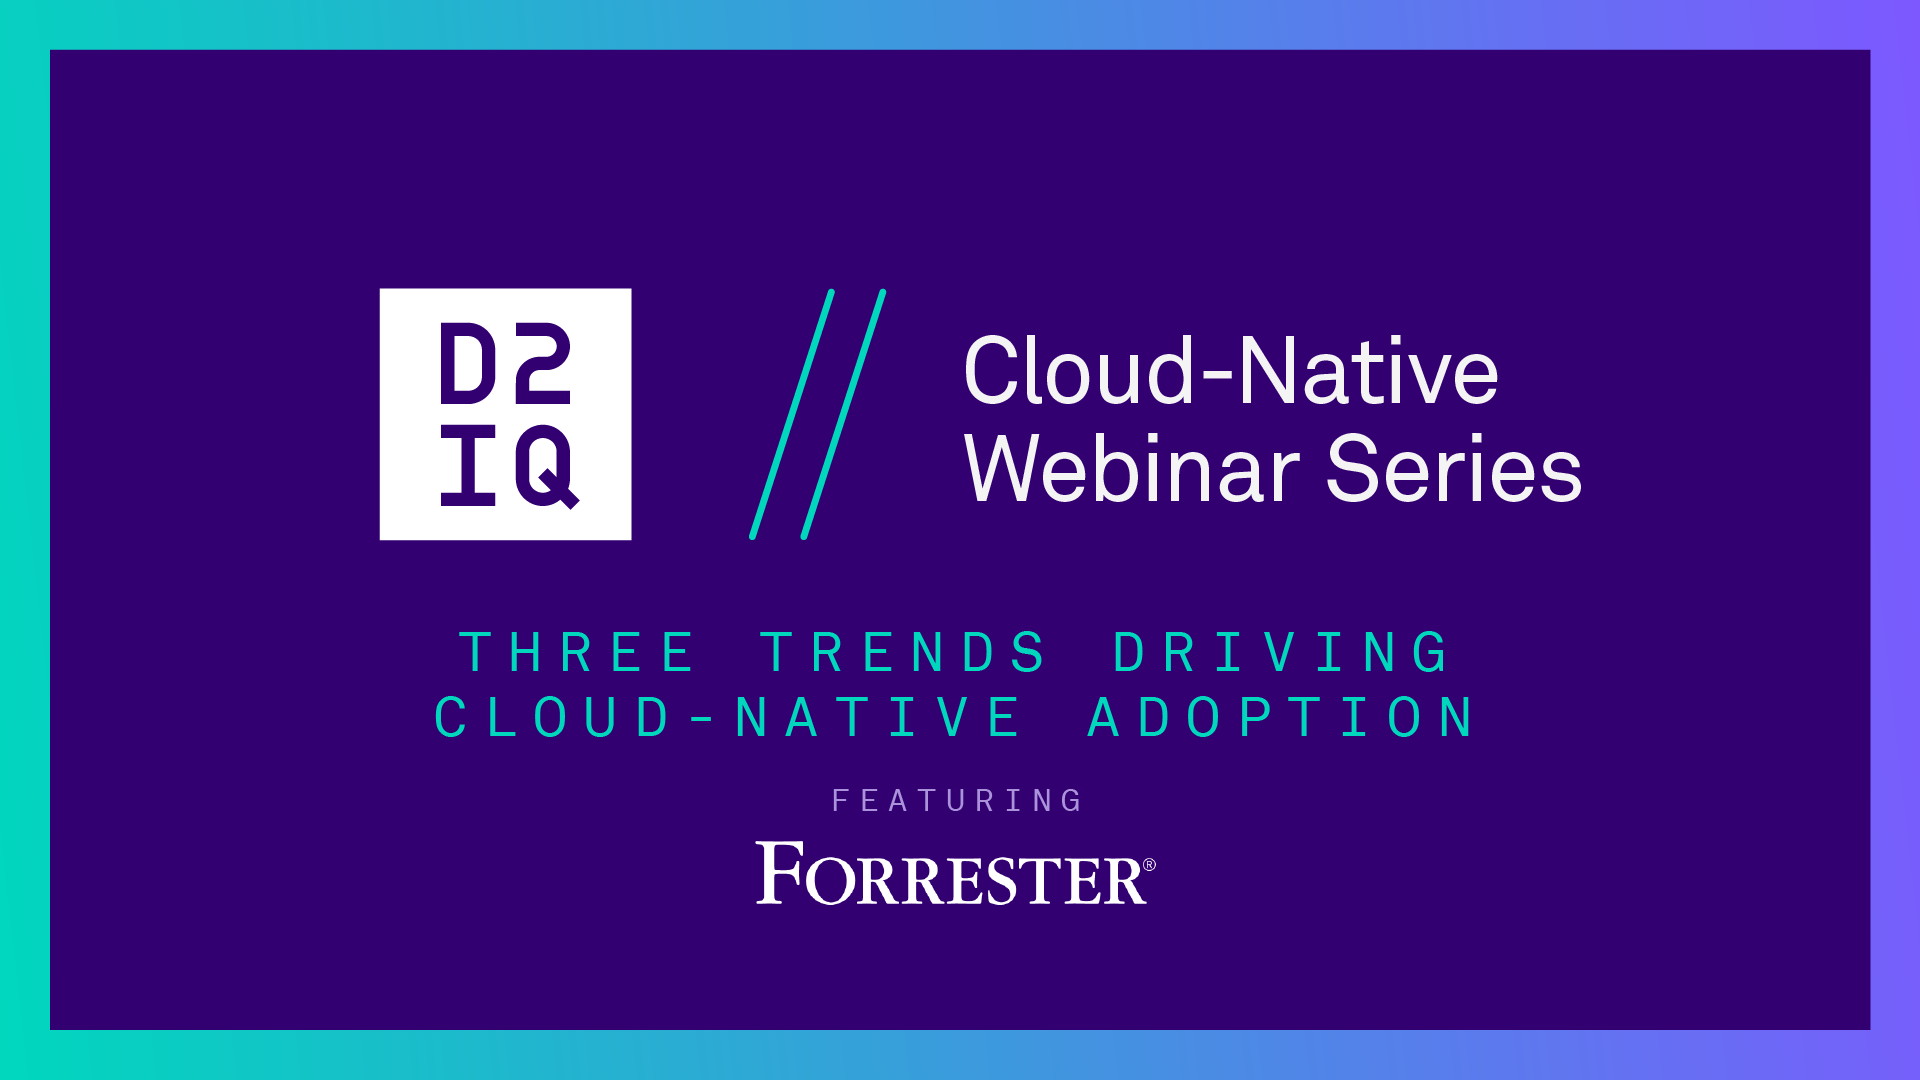 Knowledge Is Power: Join Guest Speaker Lee Sustar, Forrester Research Principal Analyst, as He Describes the Three Trends Driving Cloud-Native Adoption